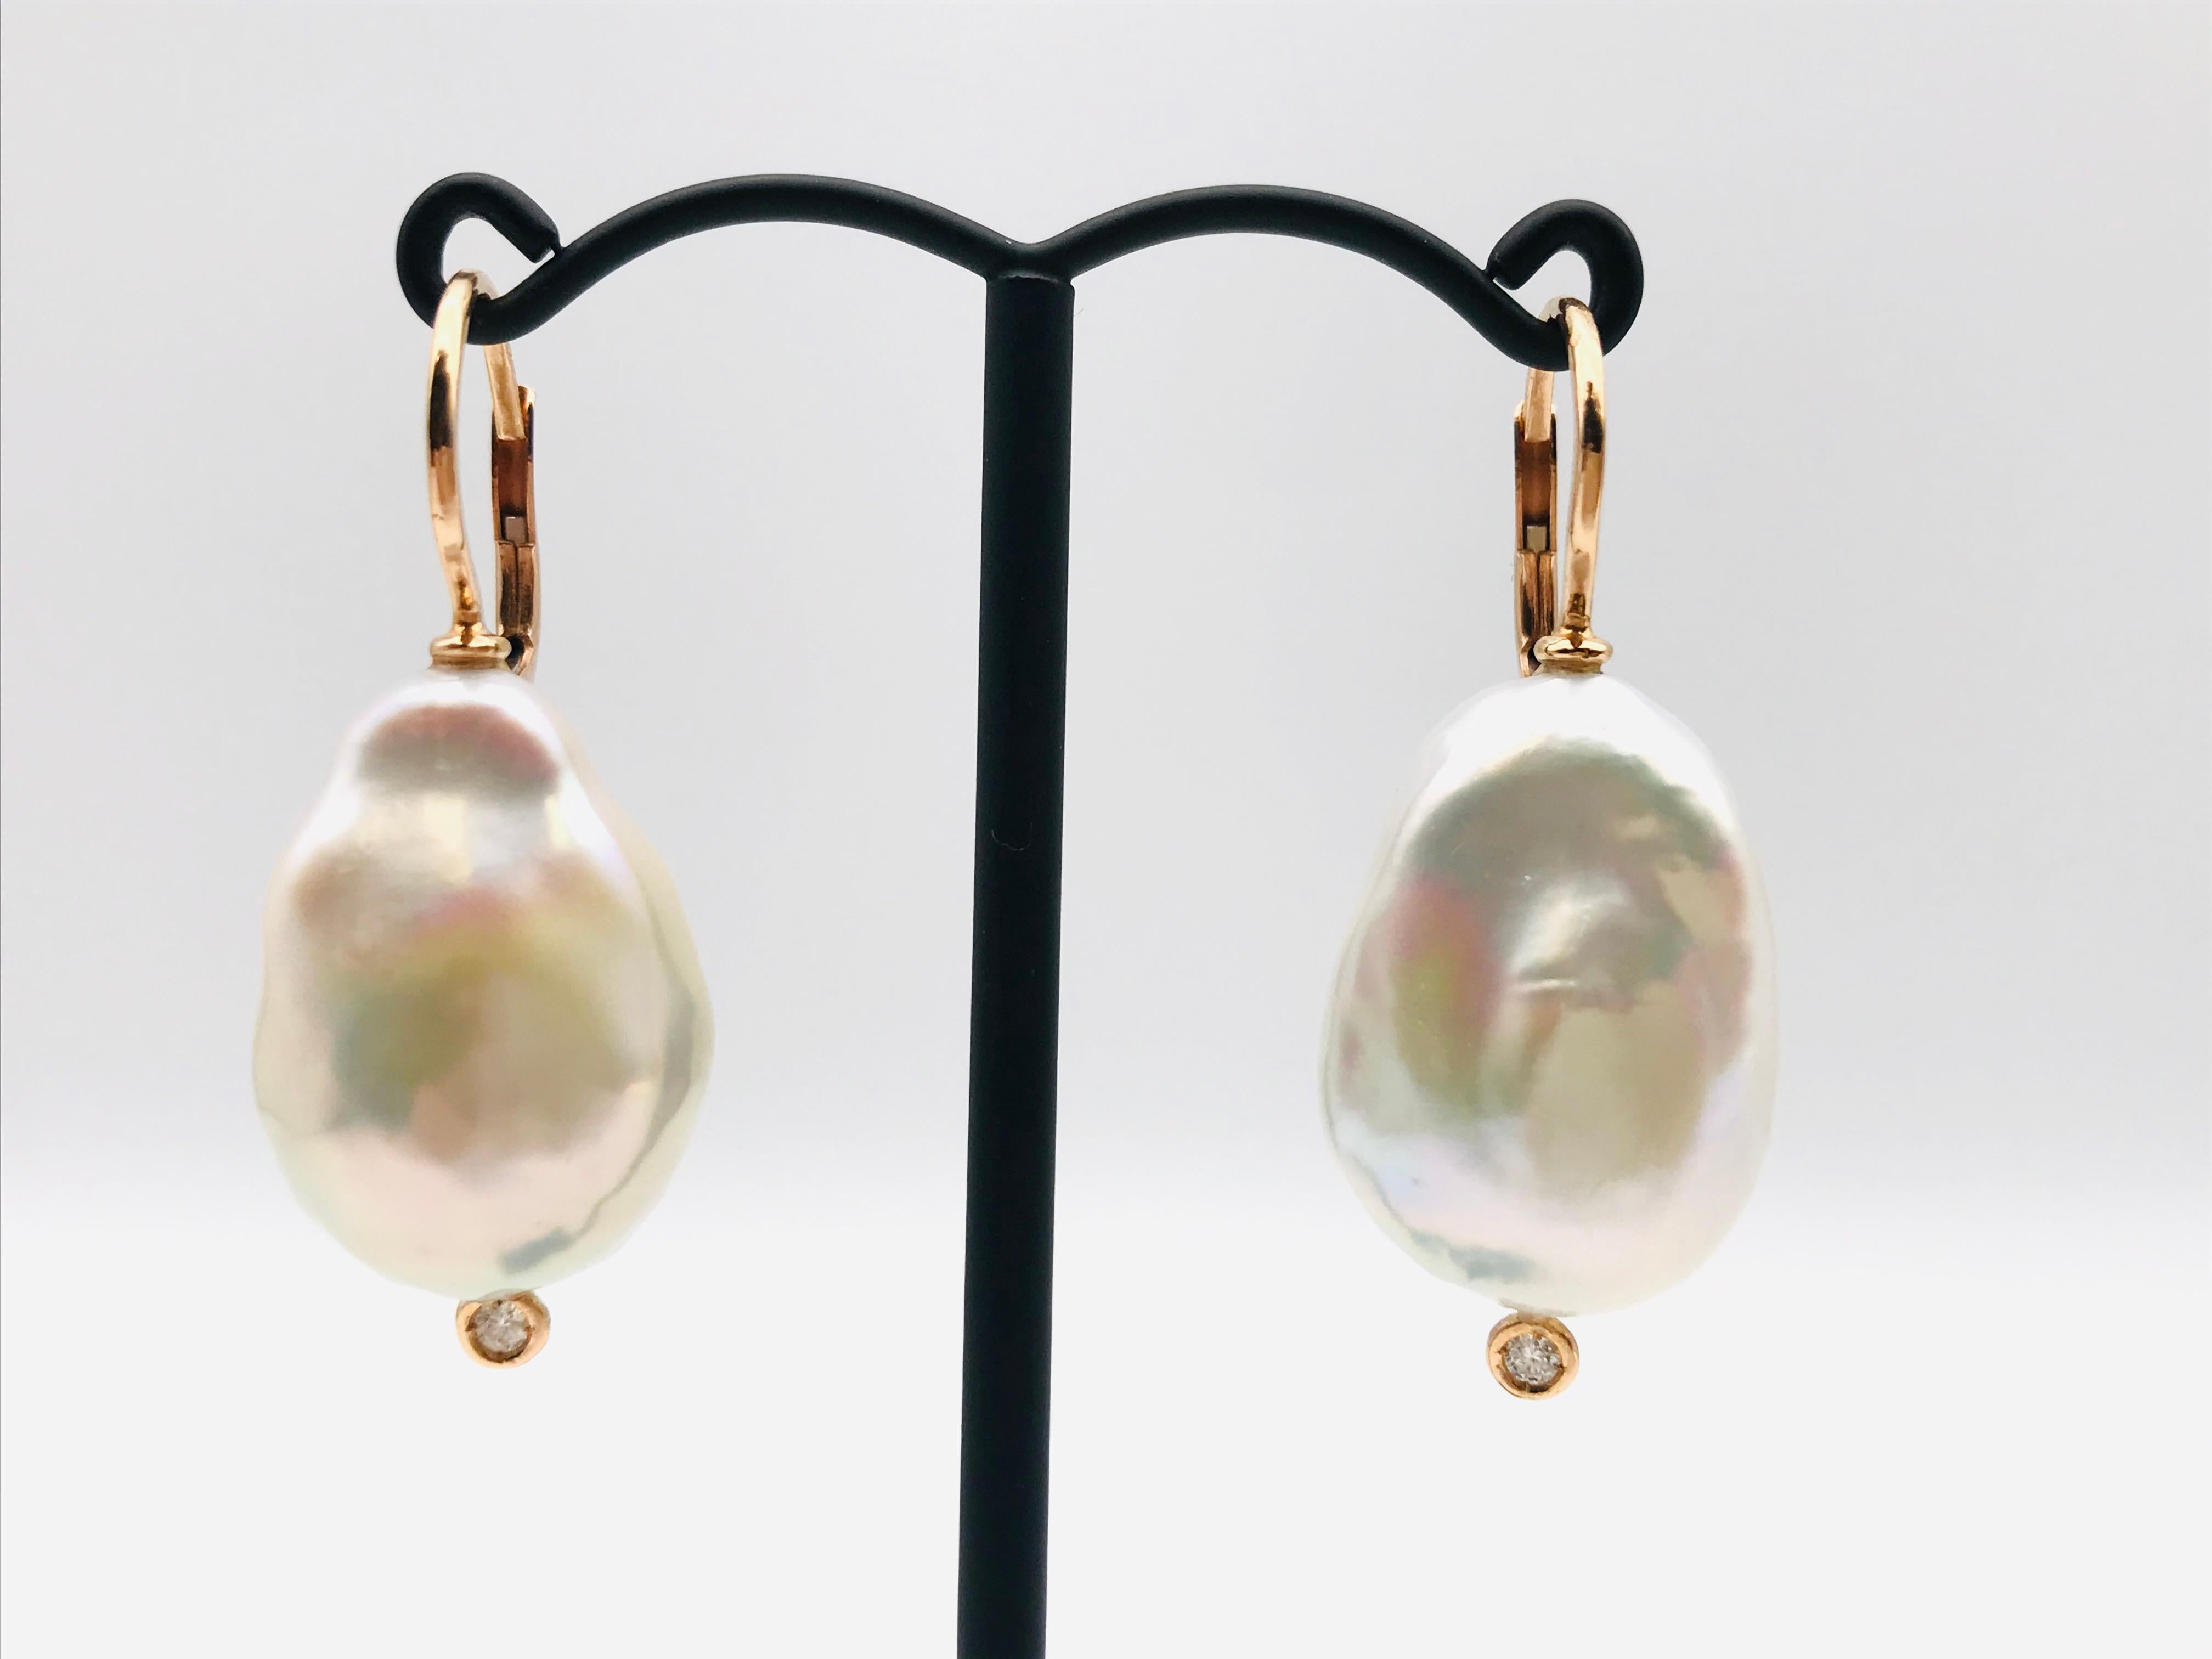 Baroque South Sea Pearl and Diamond with Yellow Gold 18k Drop Earrings 
2 Baroque South Sea Pearl 
2 Diamonds Round Cut 0.06 ct 
Yellow Gold 18 K 2.3 grams 
Security Clasp

